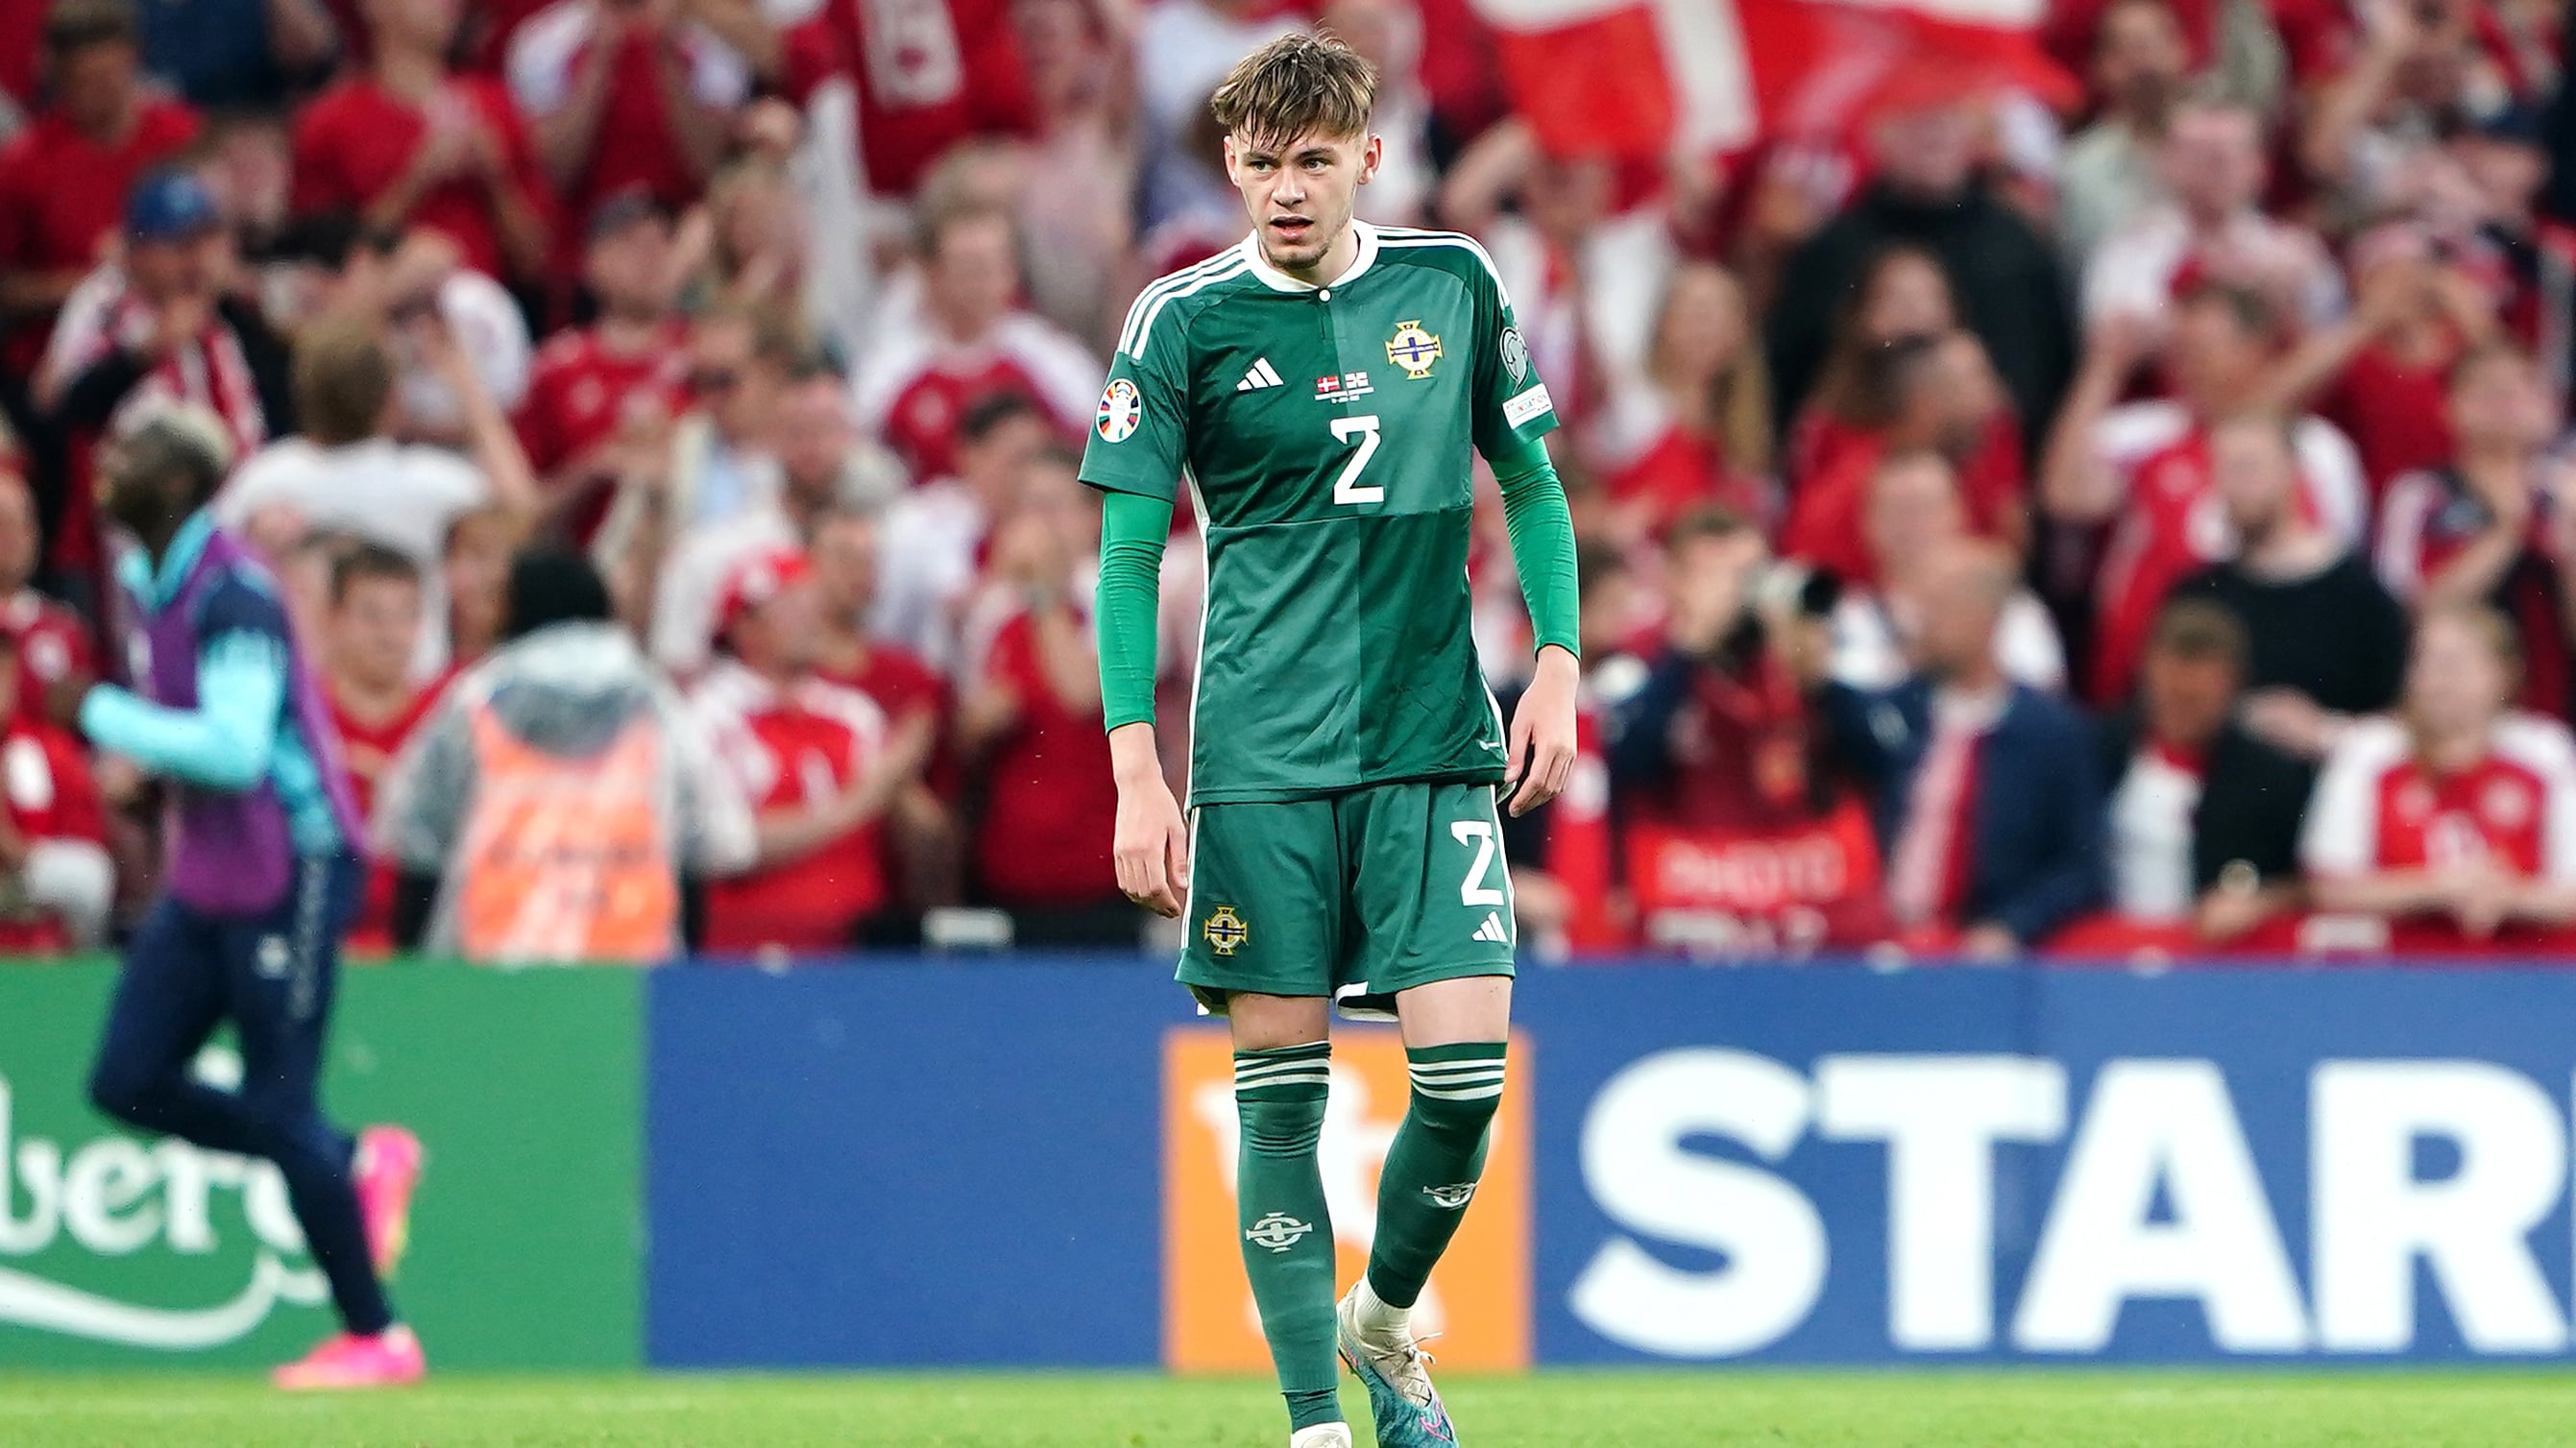 Conor Bradley has 13 caps for his country